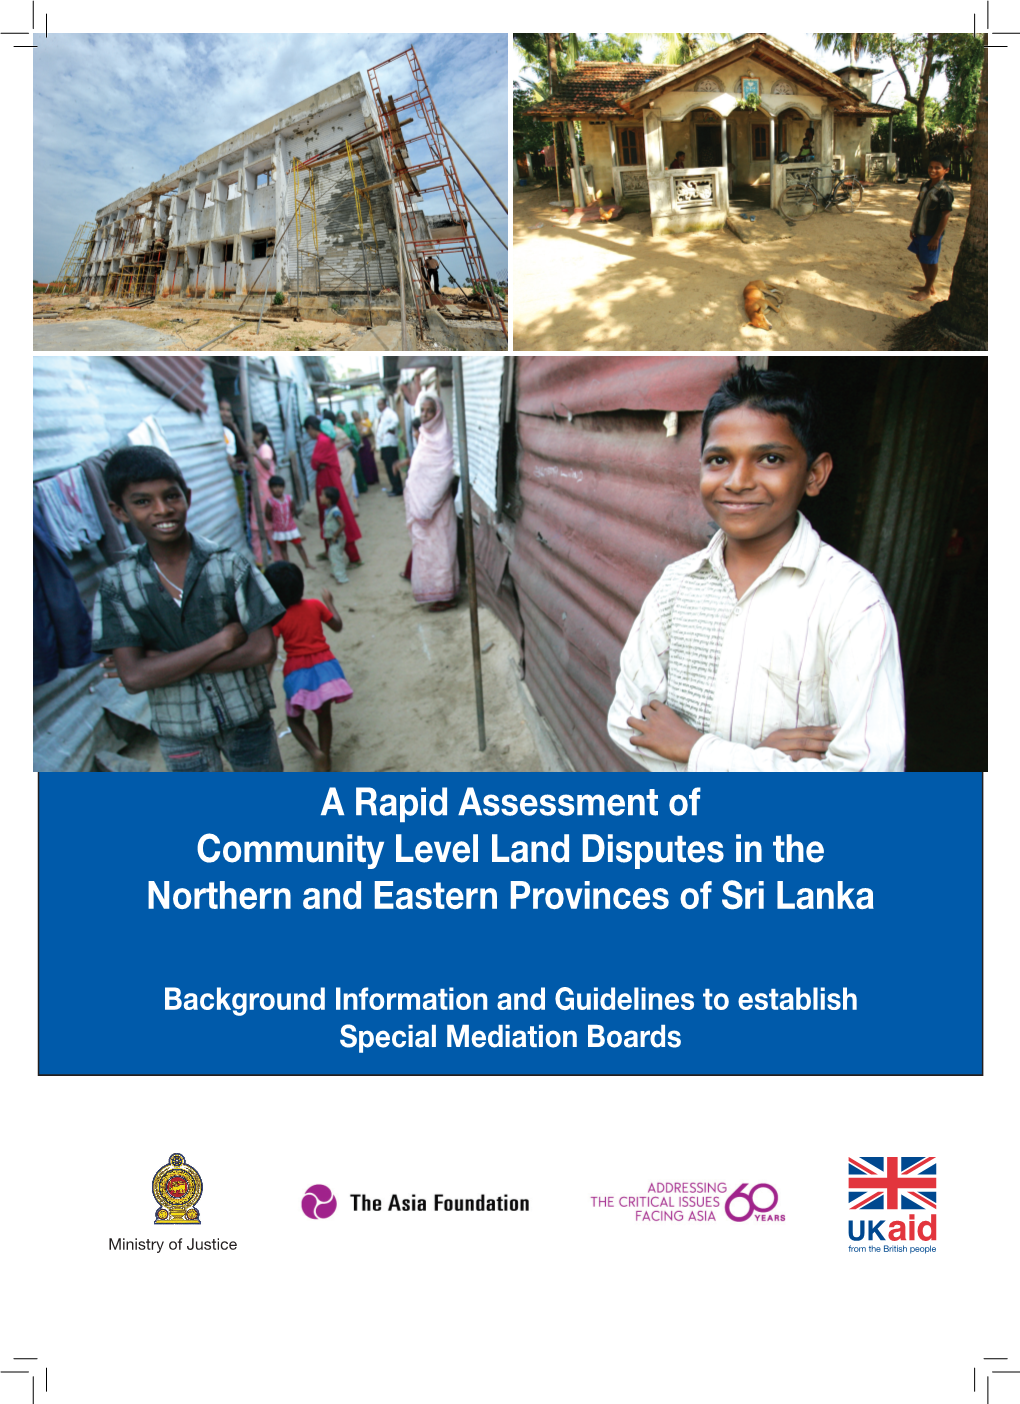 A Rapid Assessment of Community Level Land Disputes in the Northern and Eastern Provinces of Sri Lanka